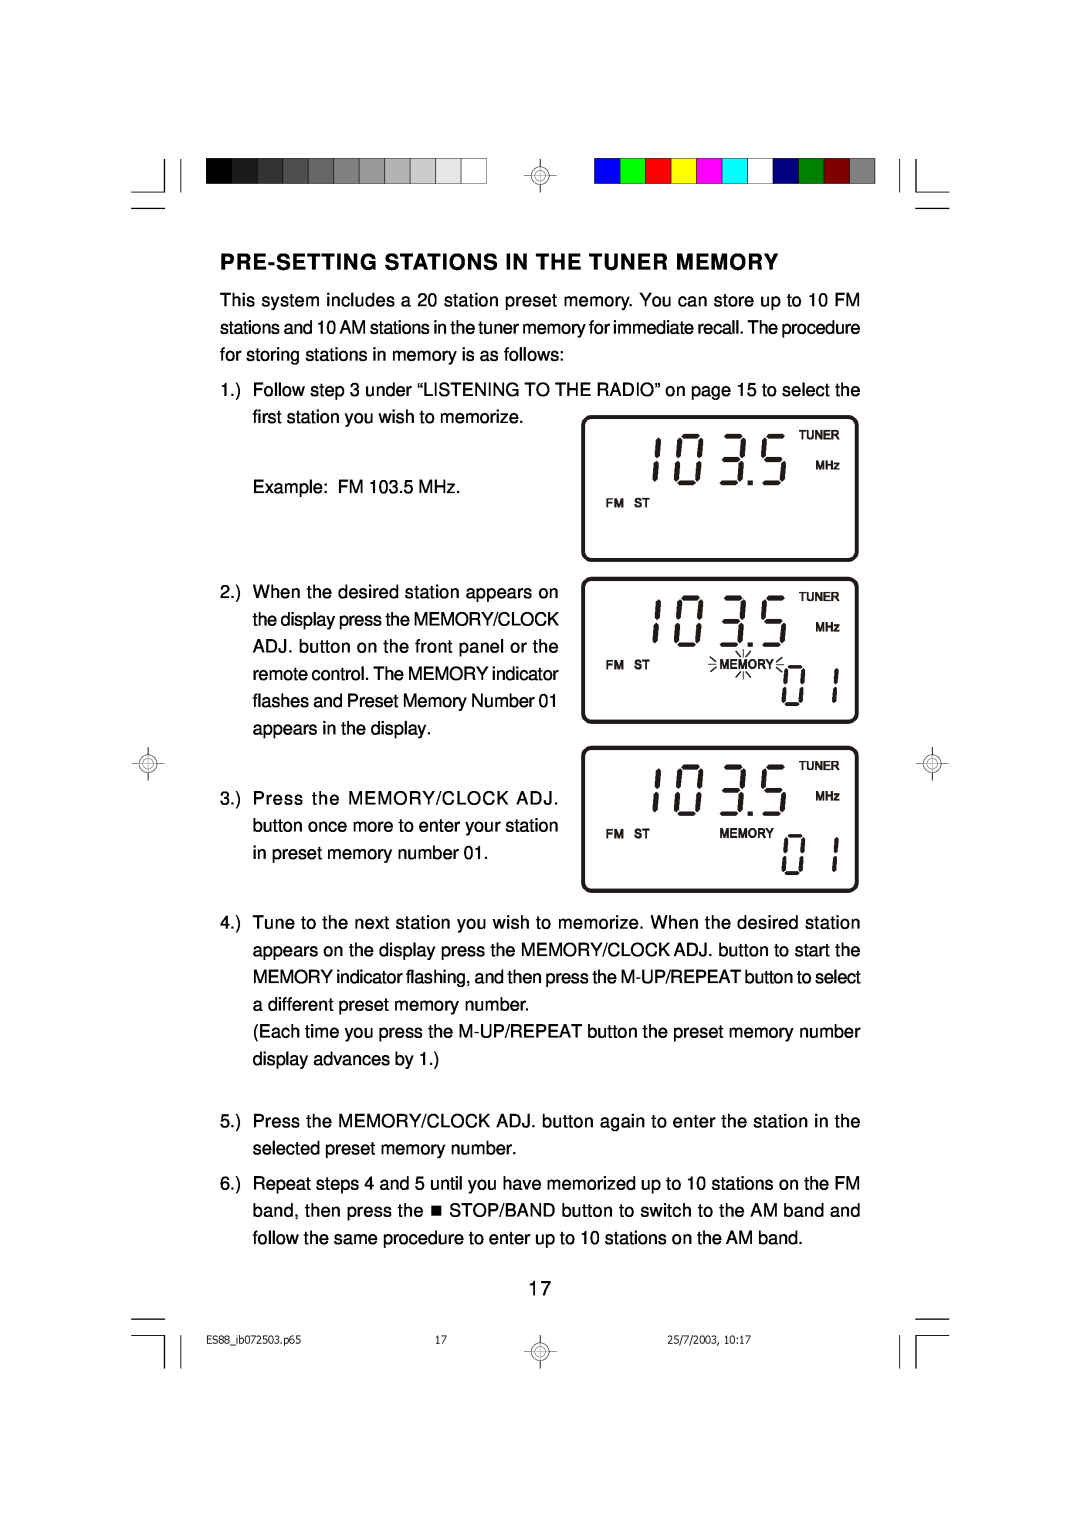 Emerson ES88 owner manual Pre-Settingstations In The Tuner Memory 